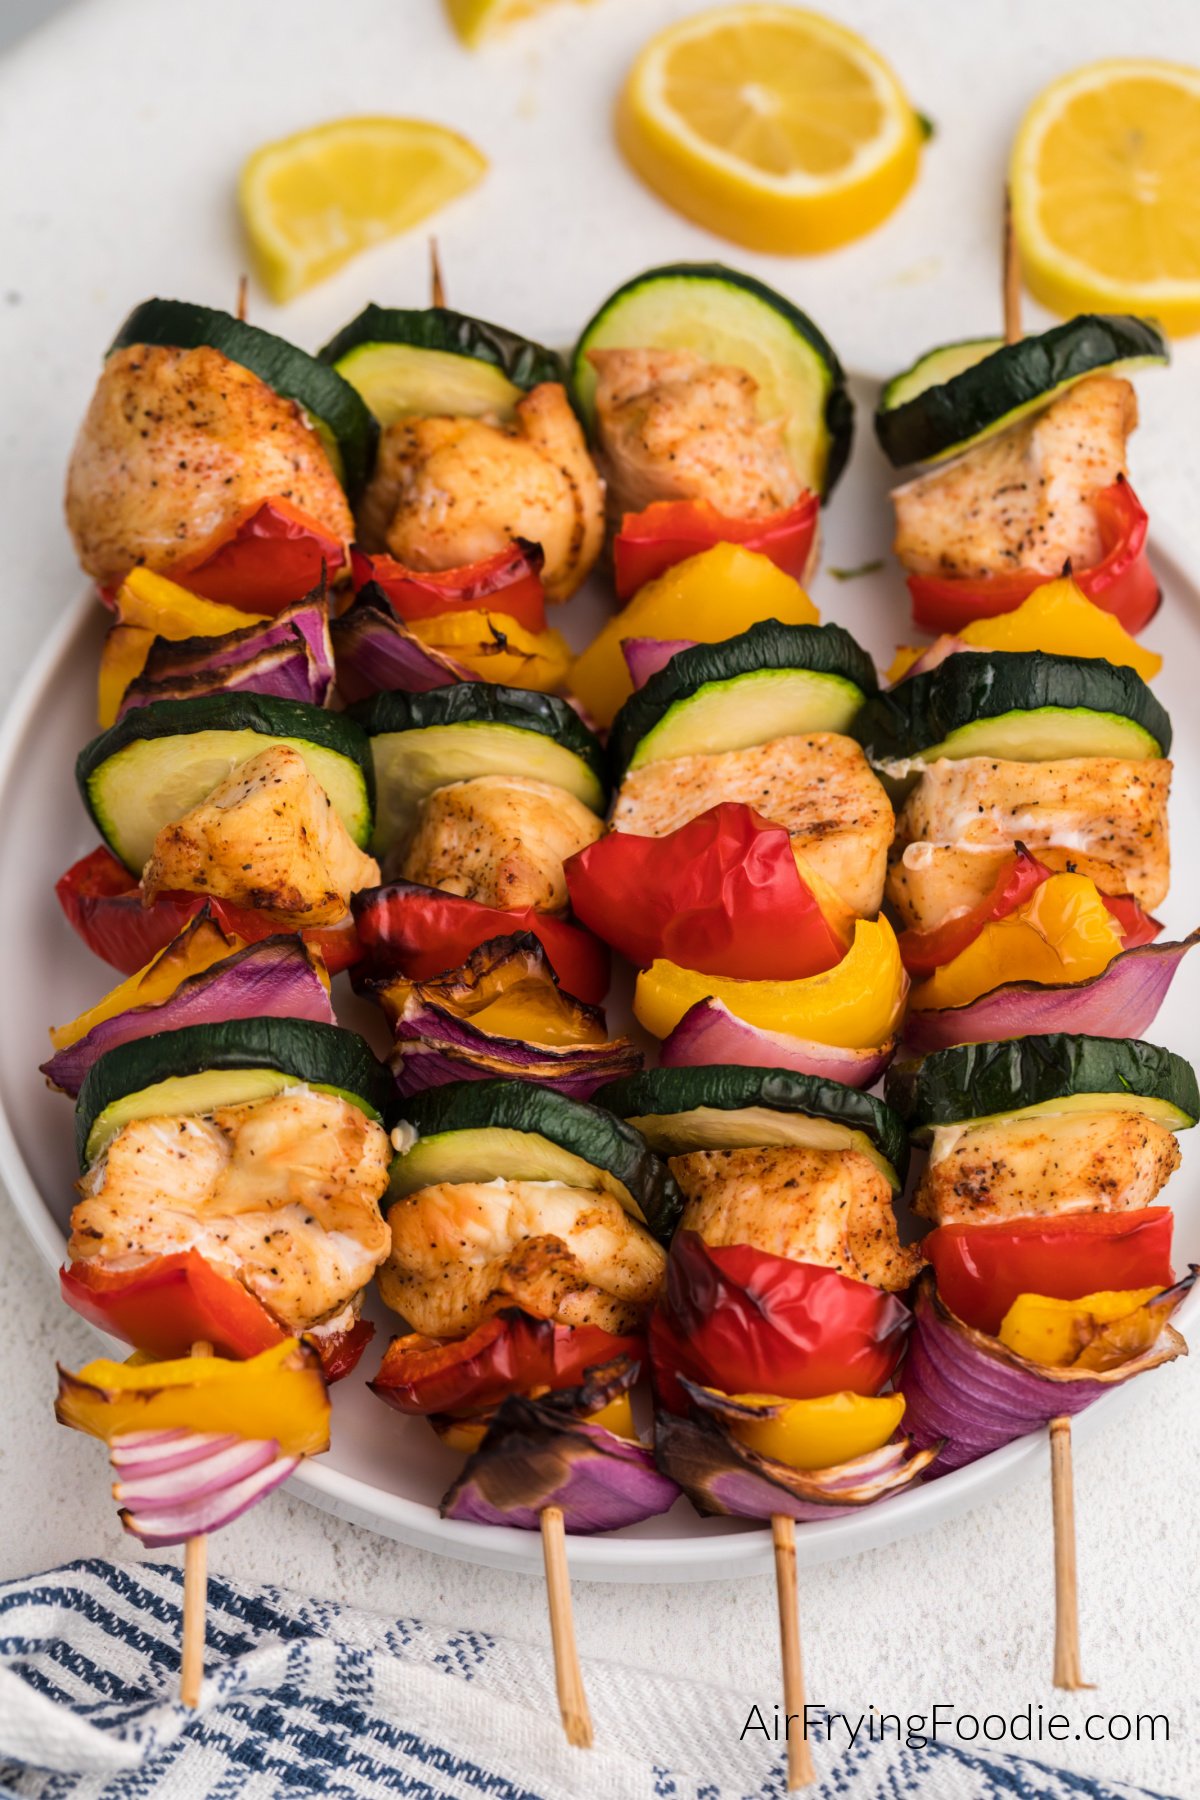 Chicken kabobs made with chicken breast and vegetables and served on a white plate.